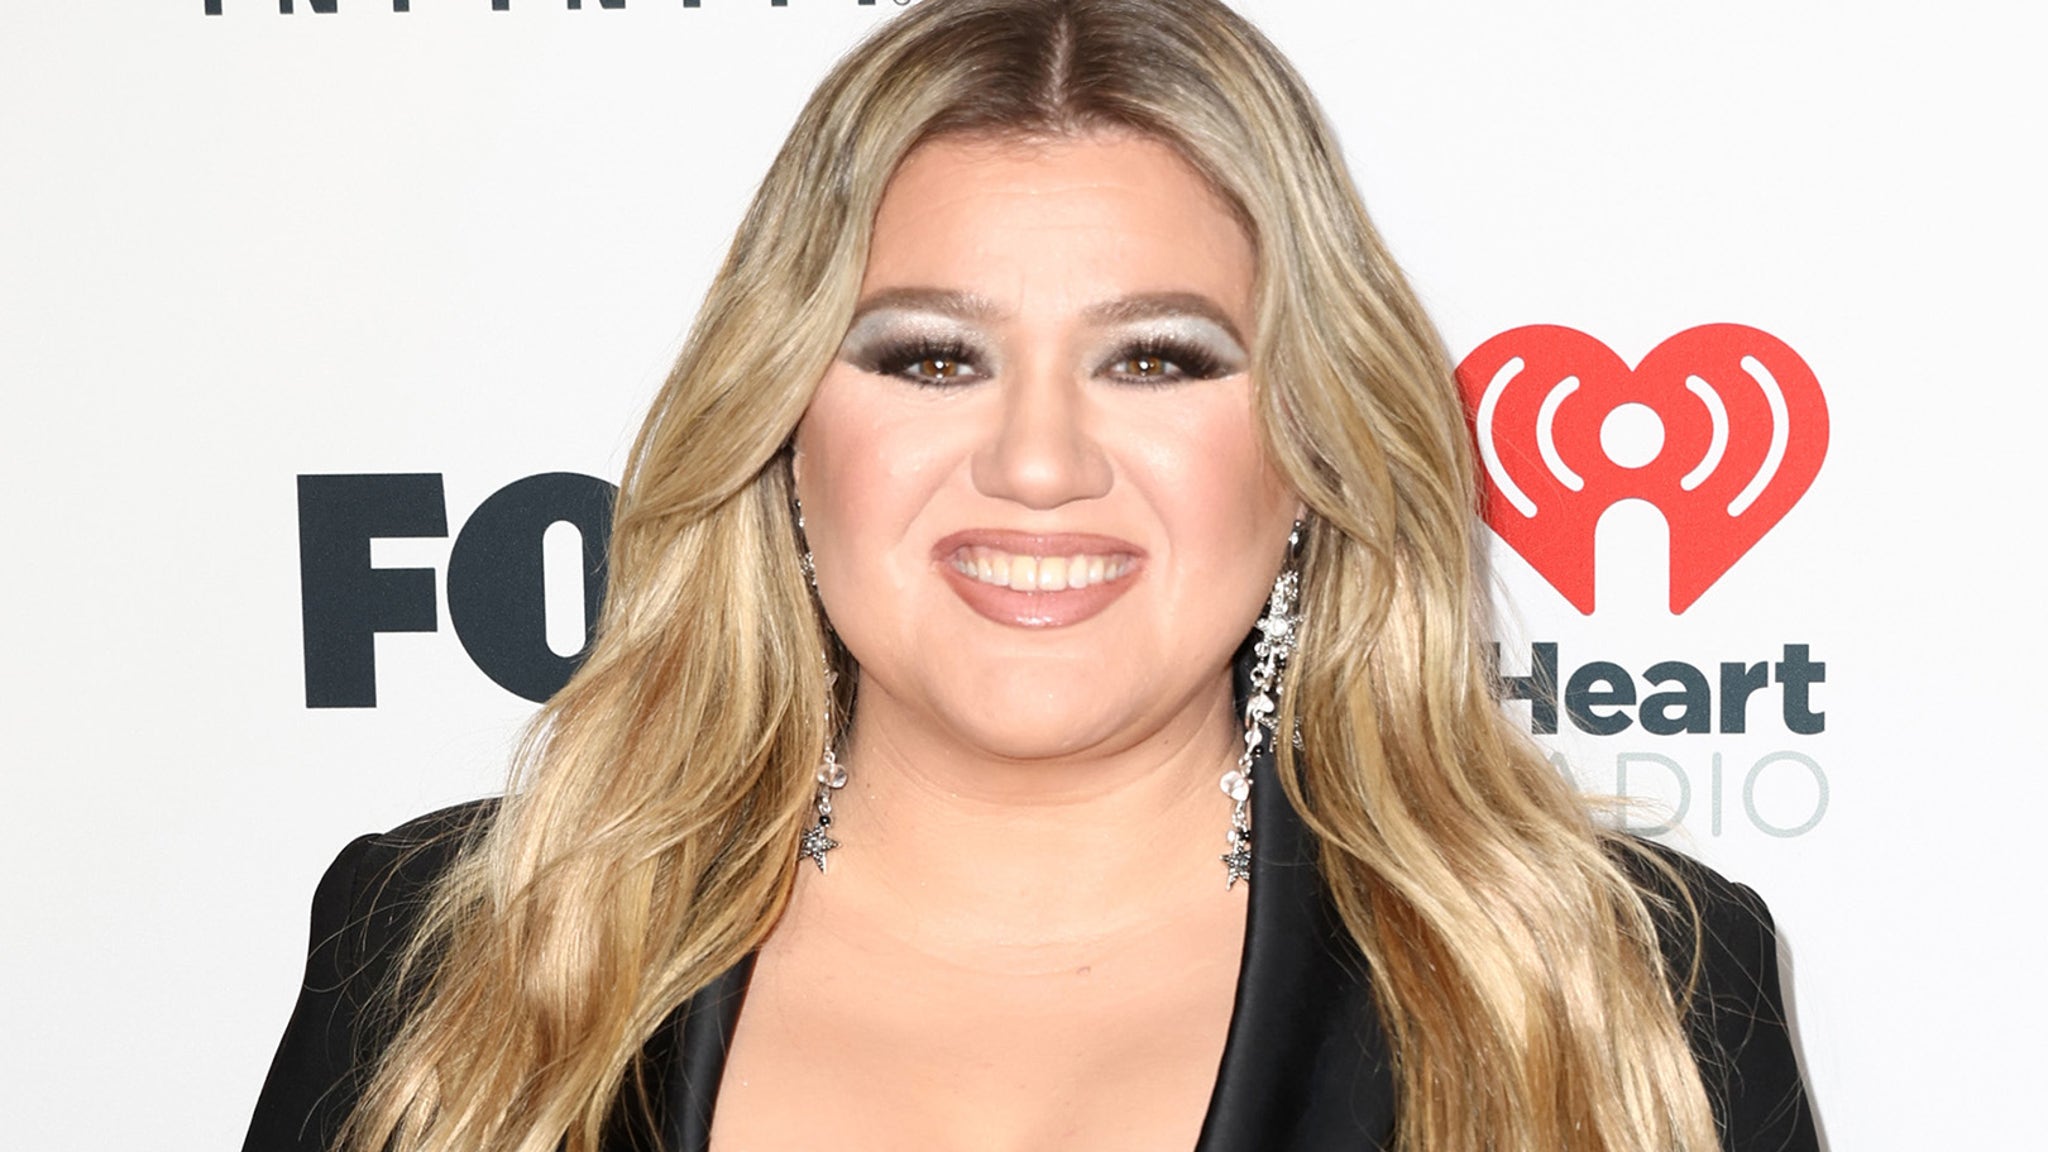 Kelly Clarkson on Why Talk Show Is Moving to New York, '100 Percent' Her Idea